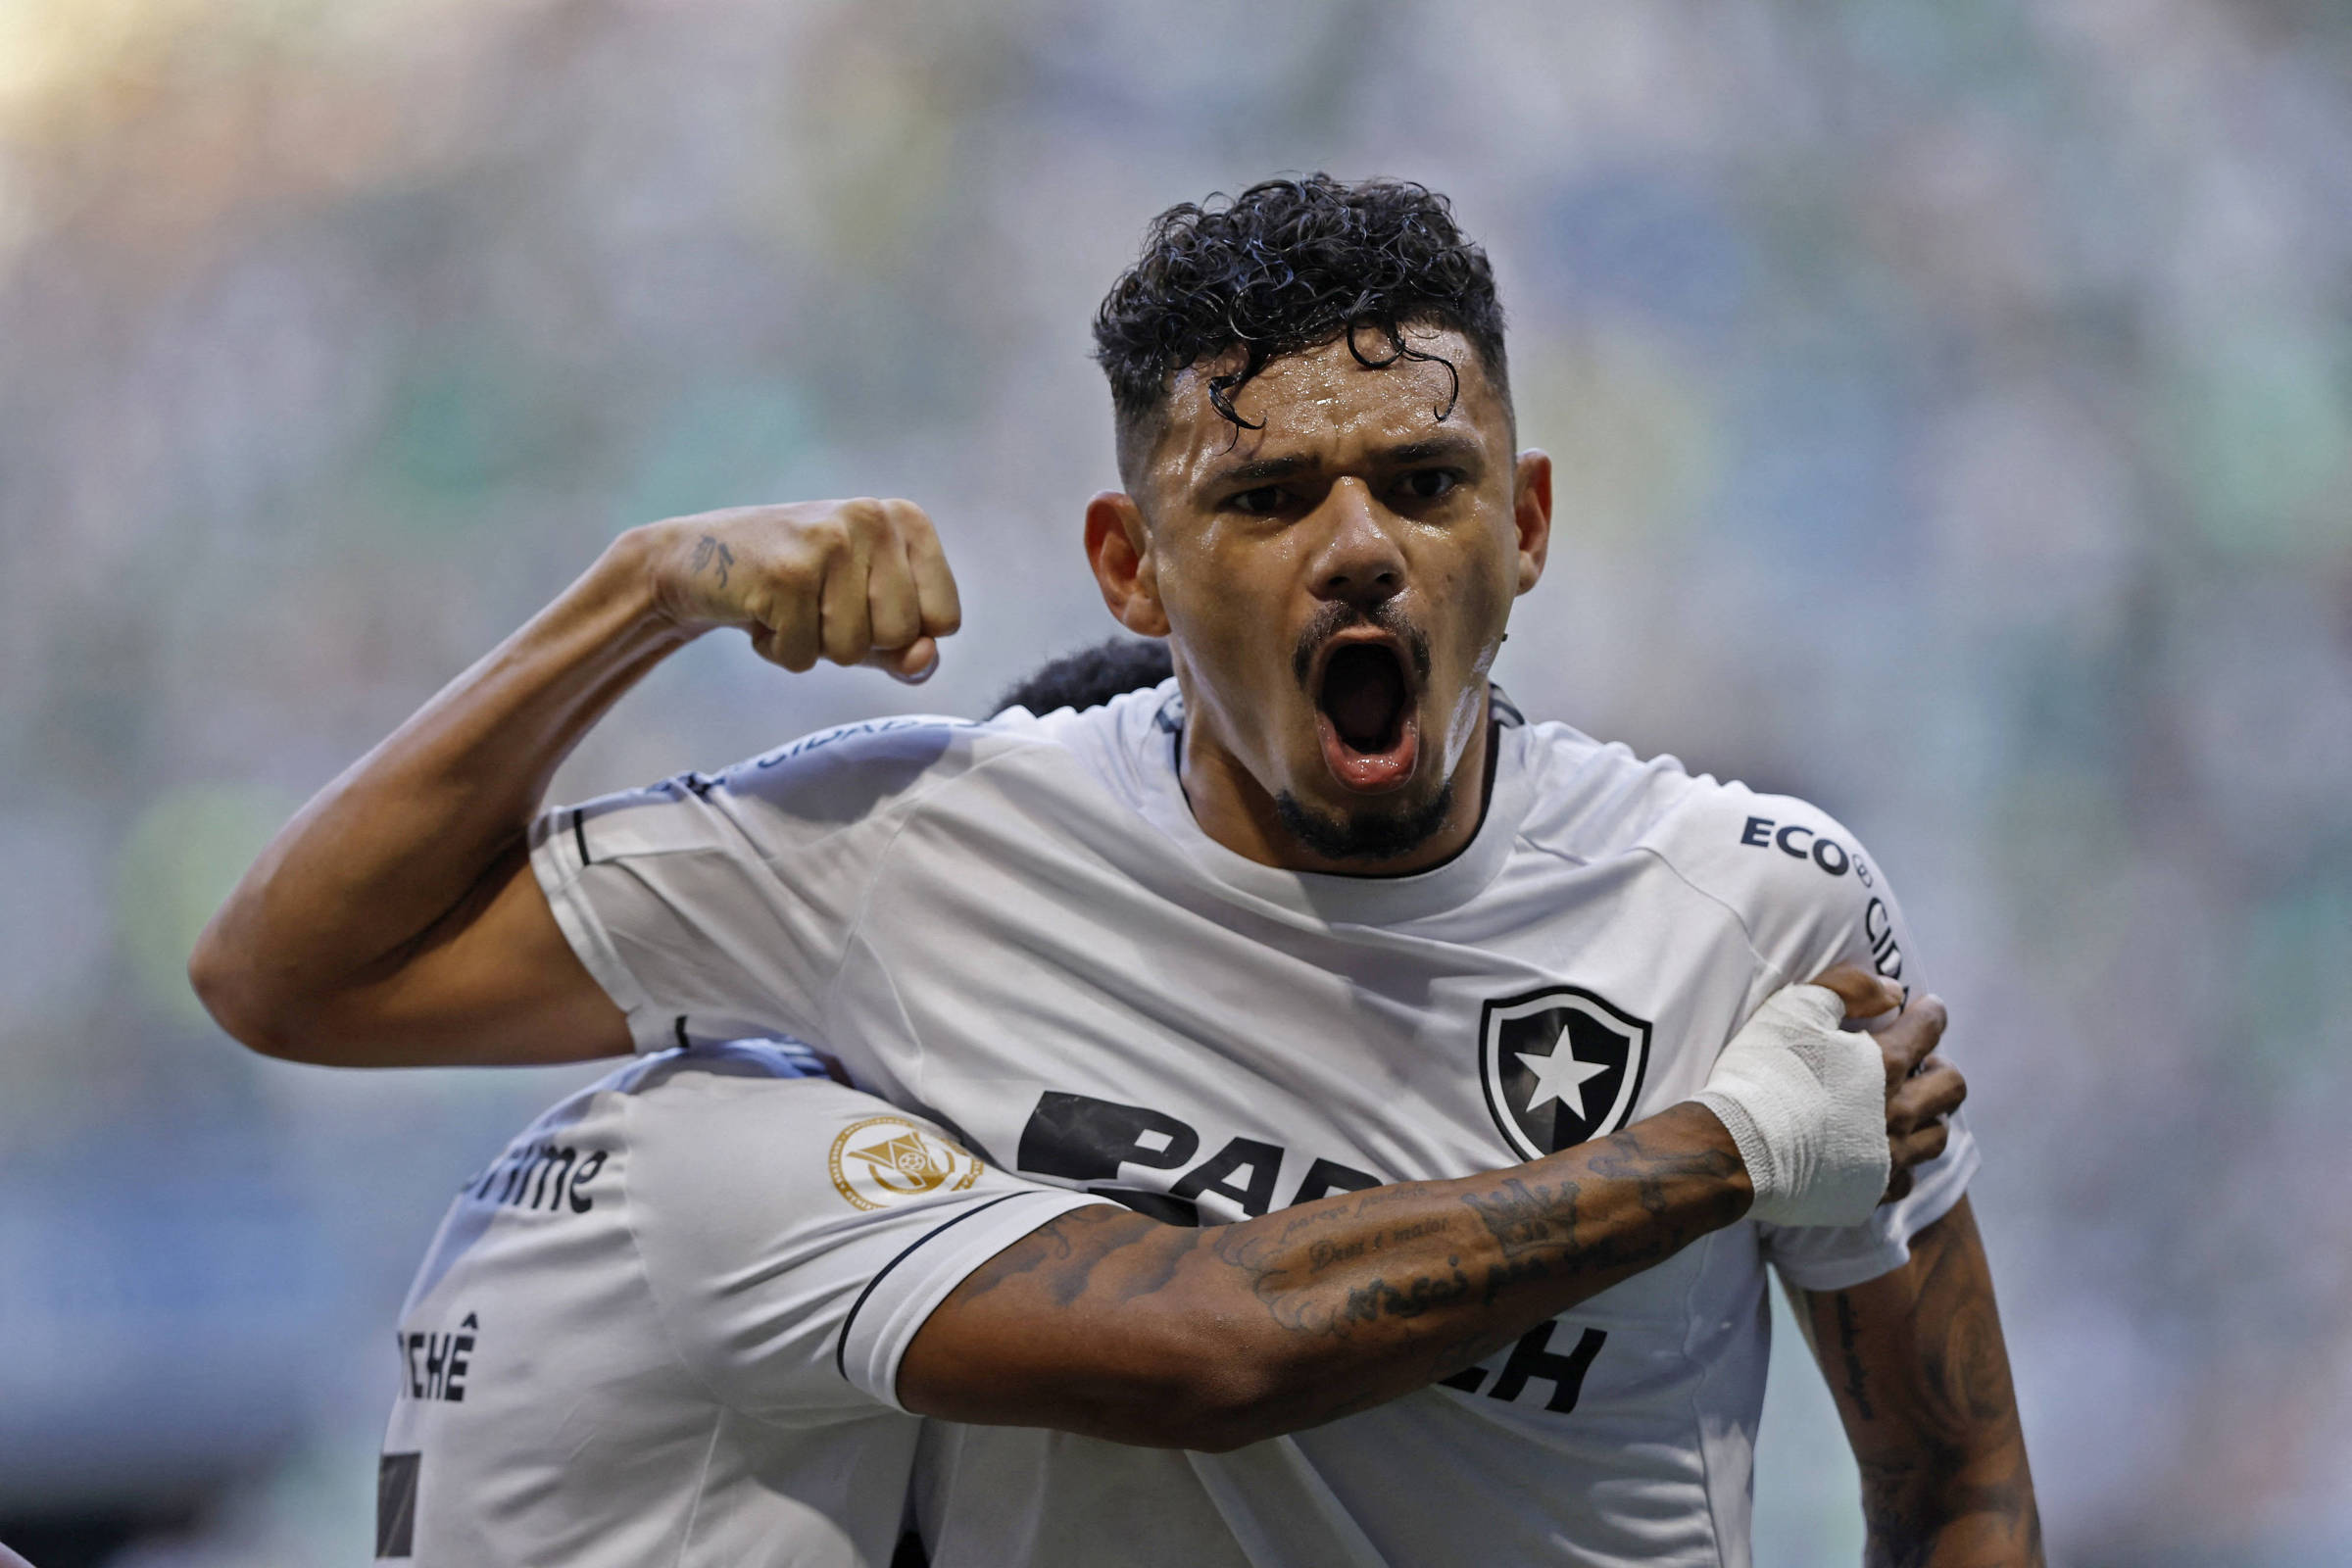 Opinion – PVC: Botafogo drops duality test in Brazil